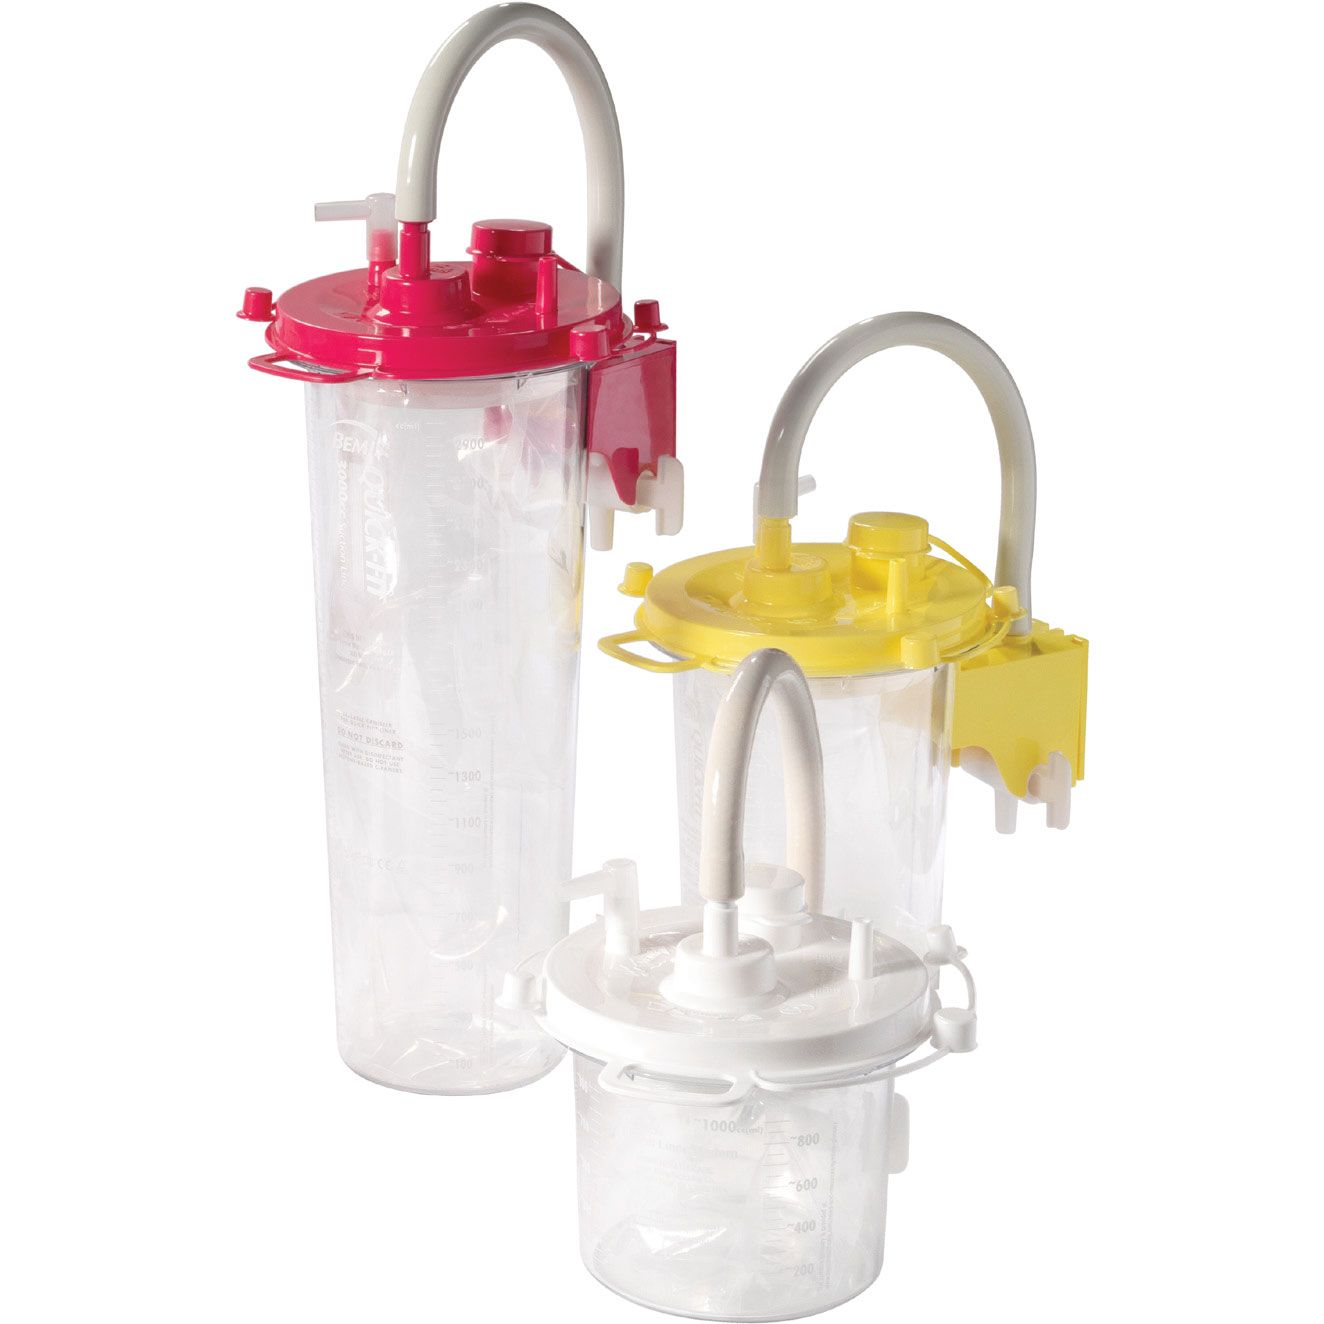 Suction Canisters